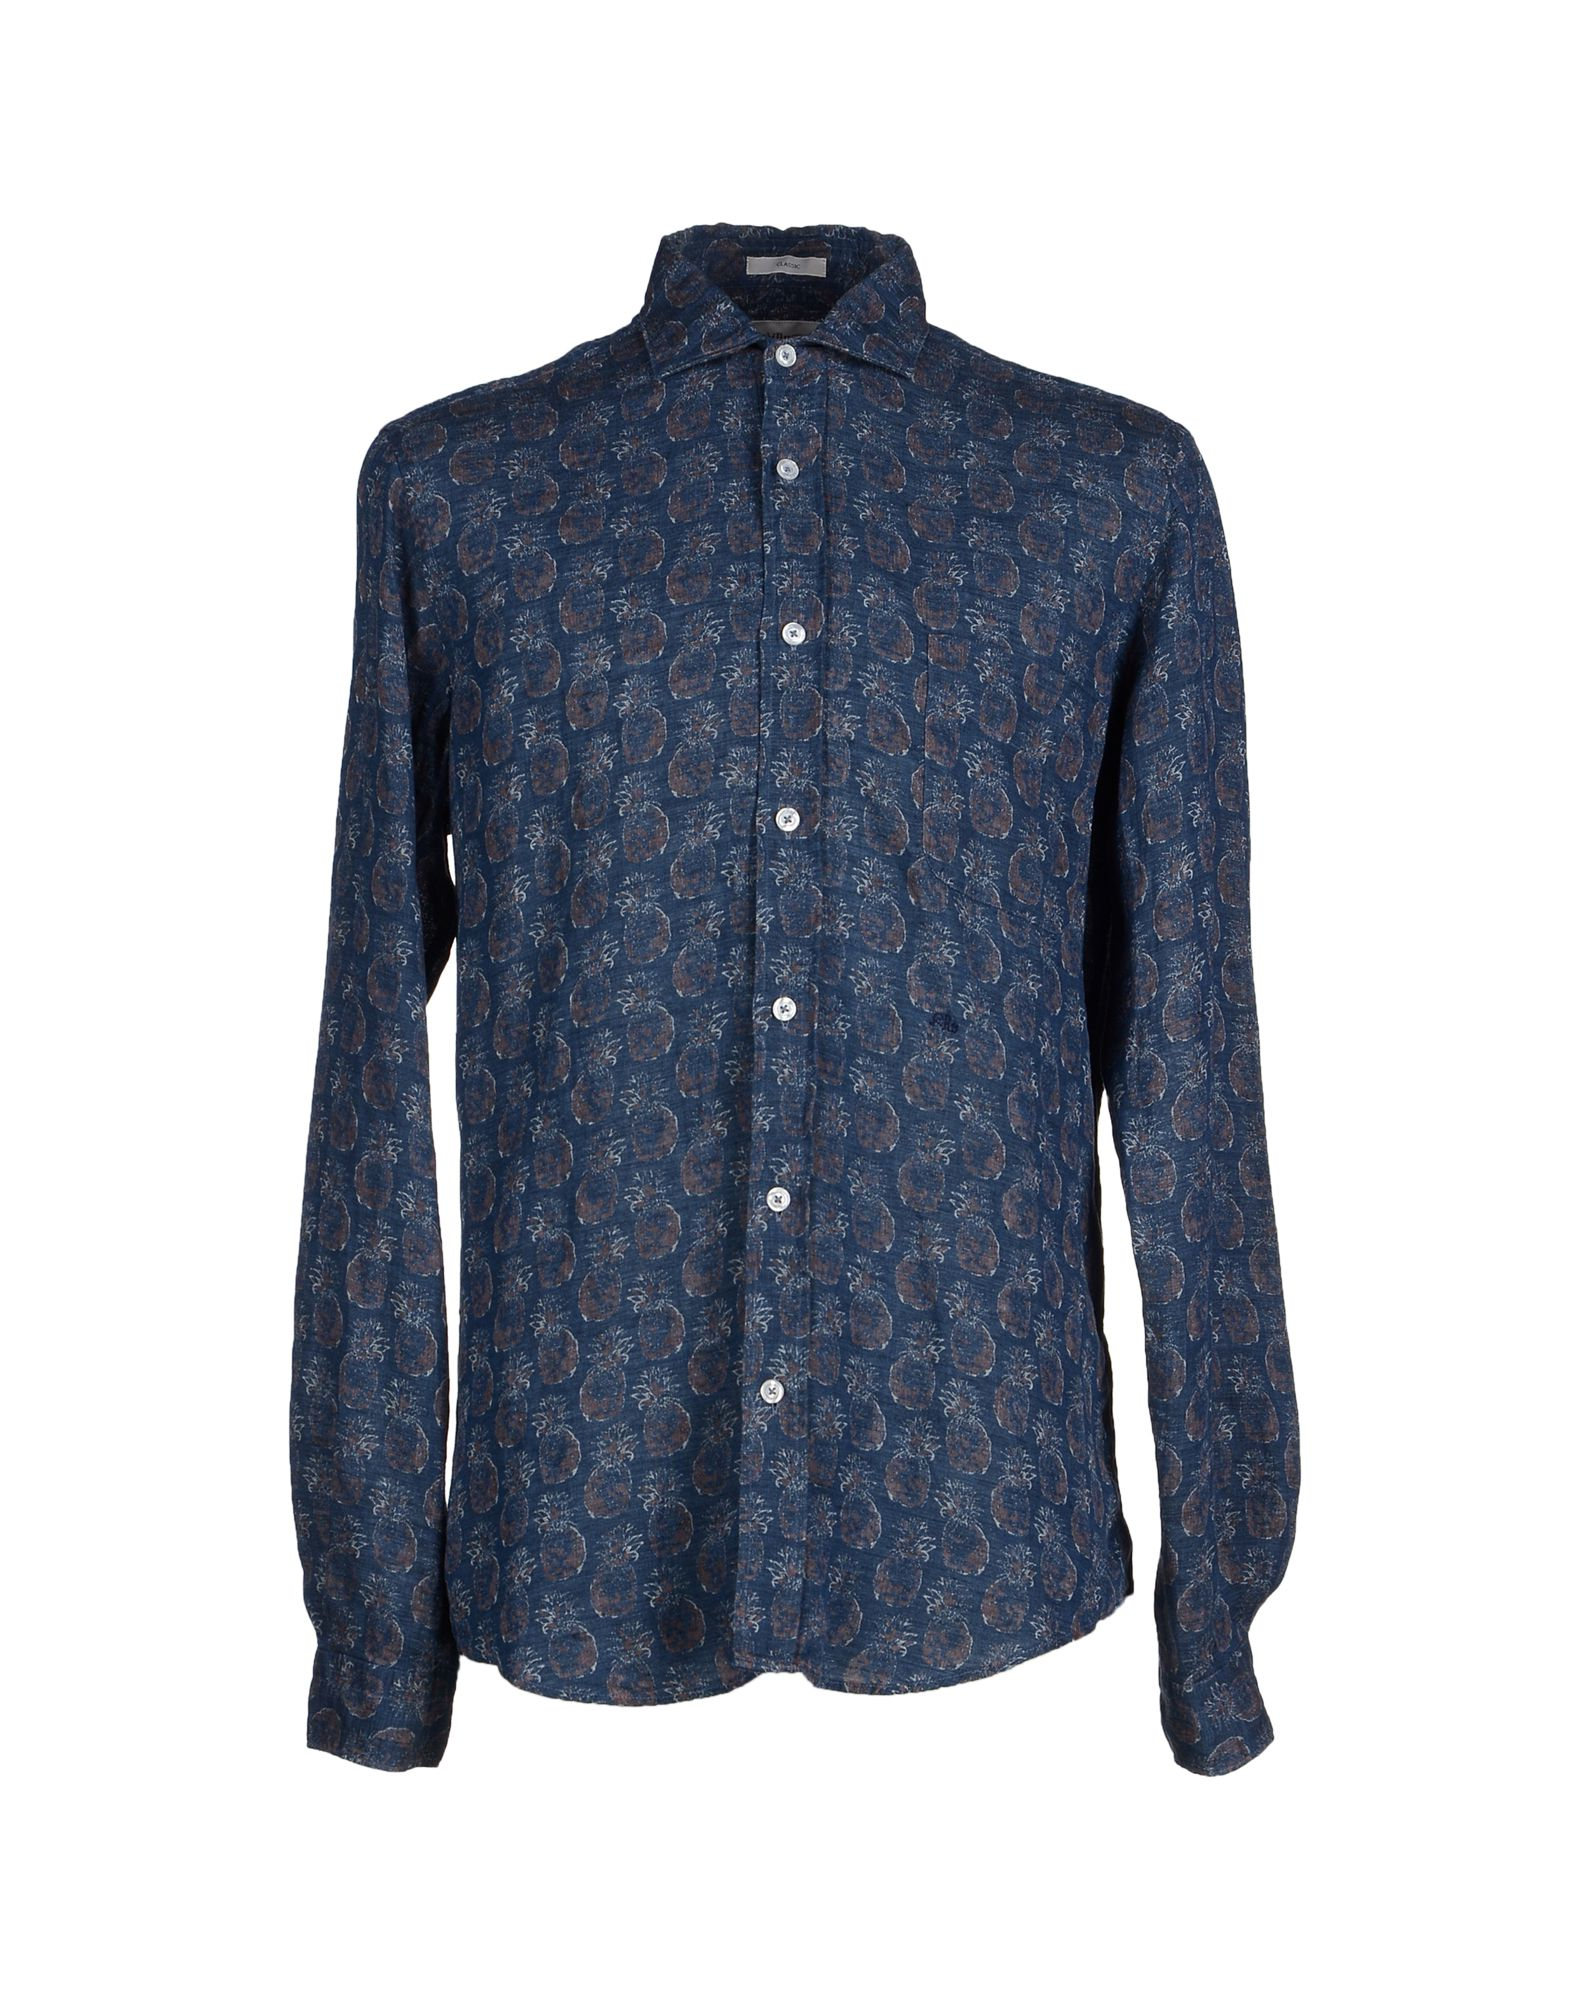 Lyst - Roy Rogers Shirt in Blue for Men